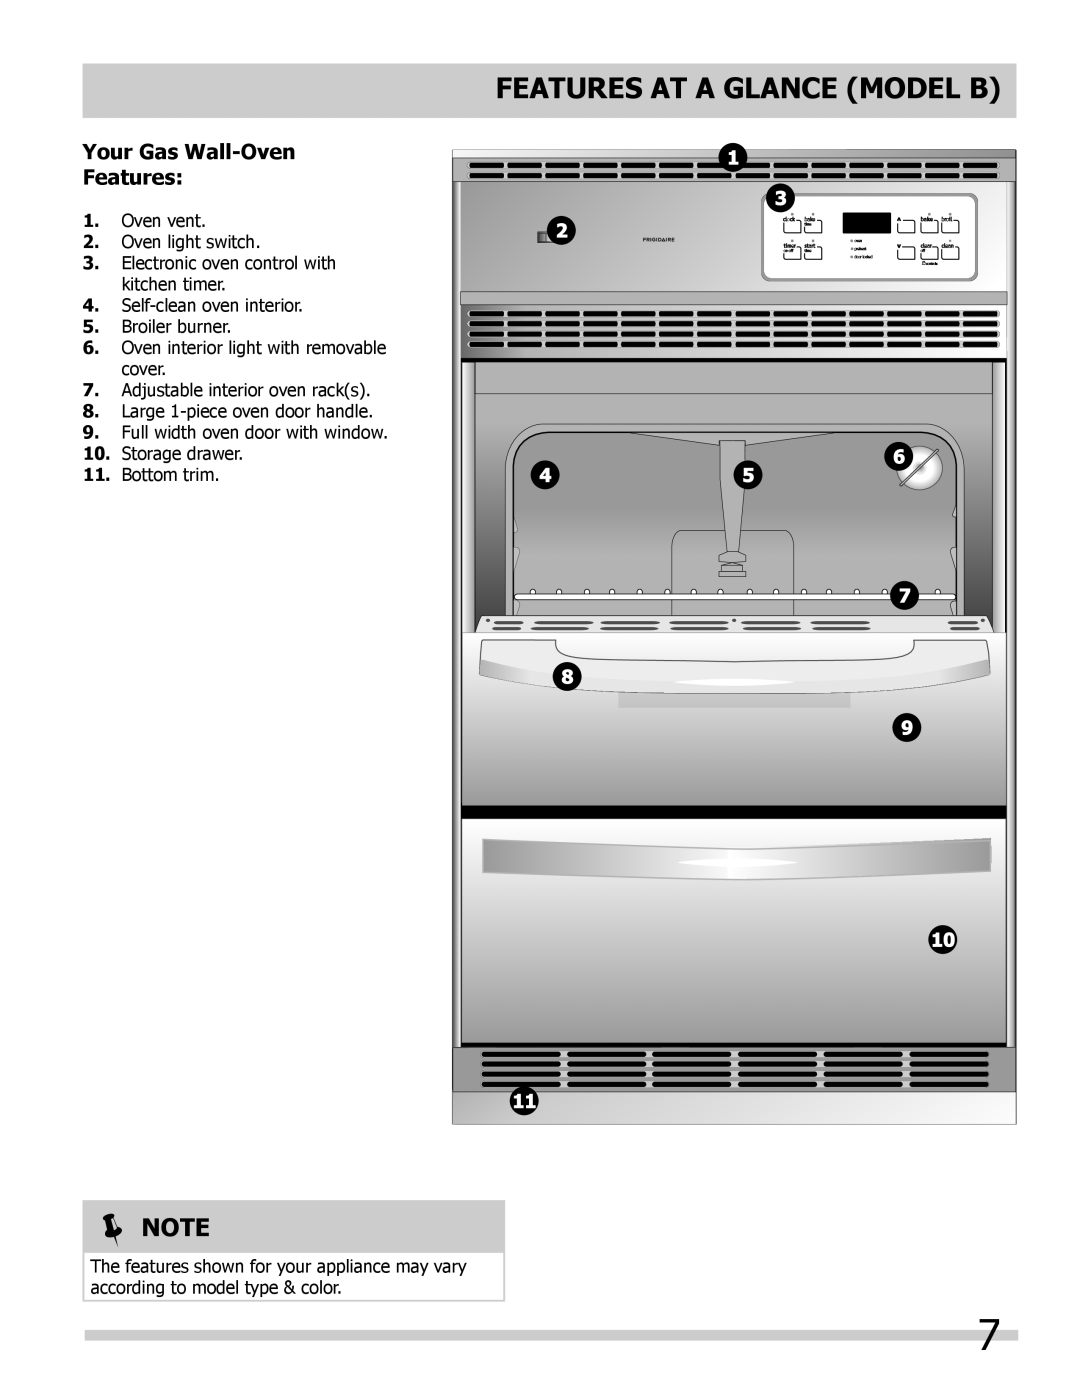 Frigidaire 318200964 important safety instructions FEATURES AT A GLANCE Model B,  Note, Your Gas Wall-Oven Features 